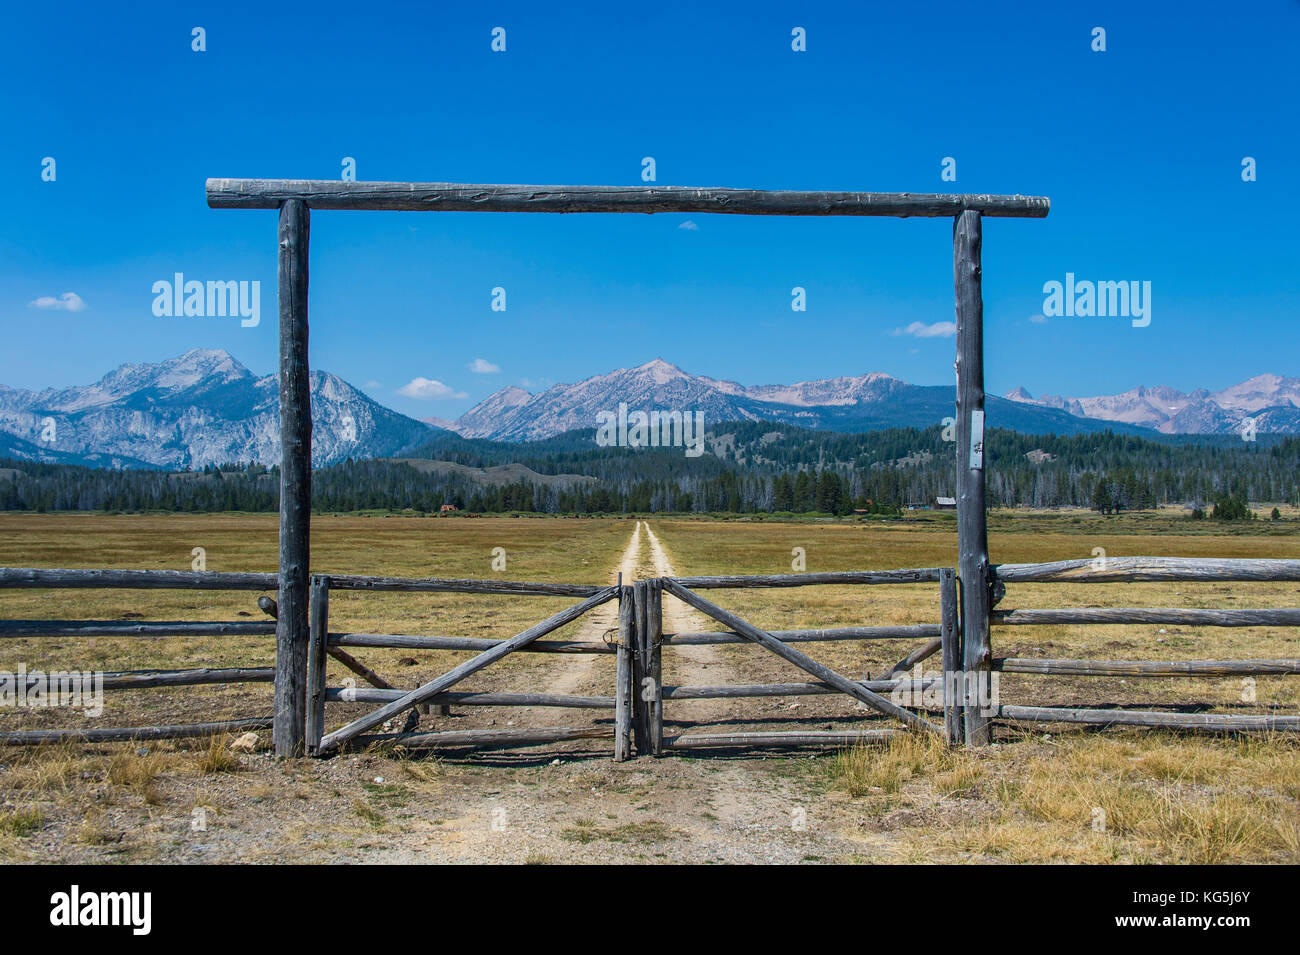 Gate to a ranch in a valley north of Sun valley, Sawtooth National Forest, Idaho, USA Stock Photo